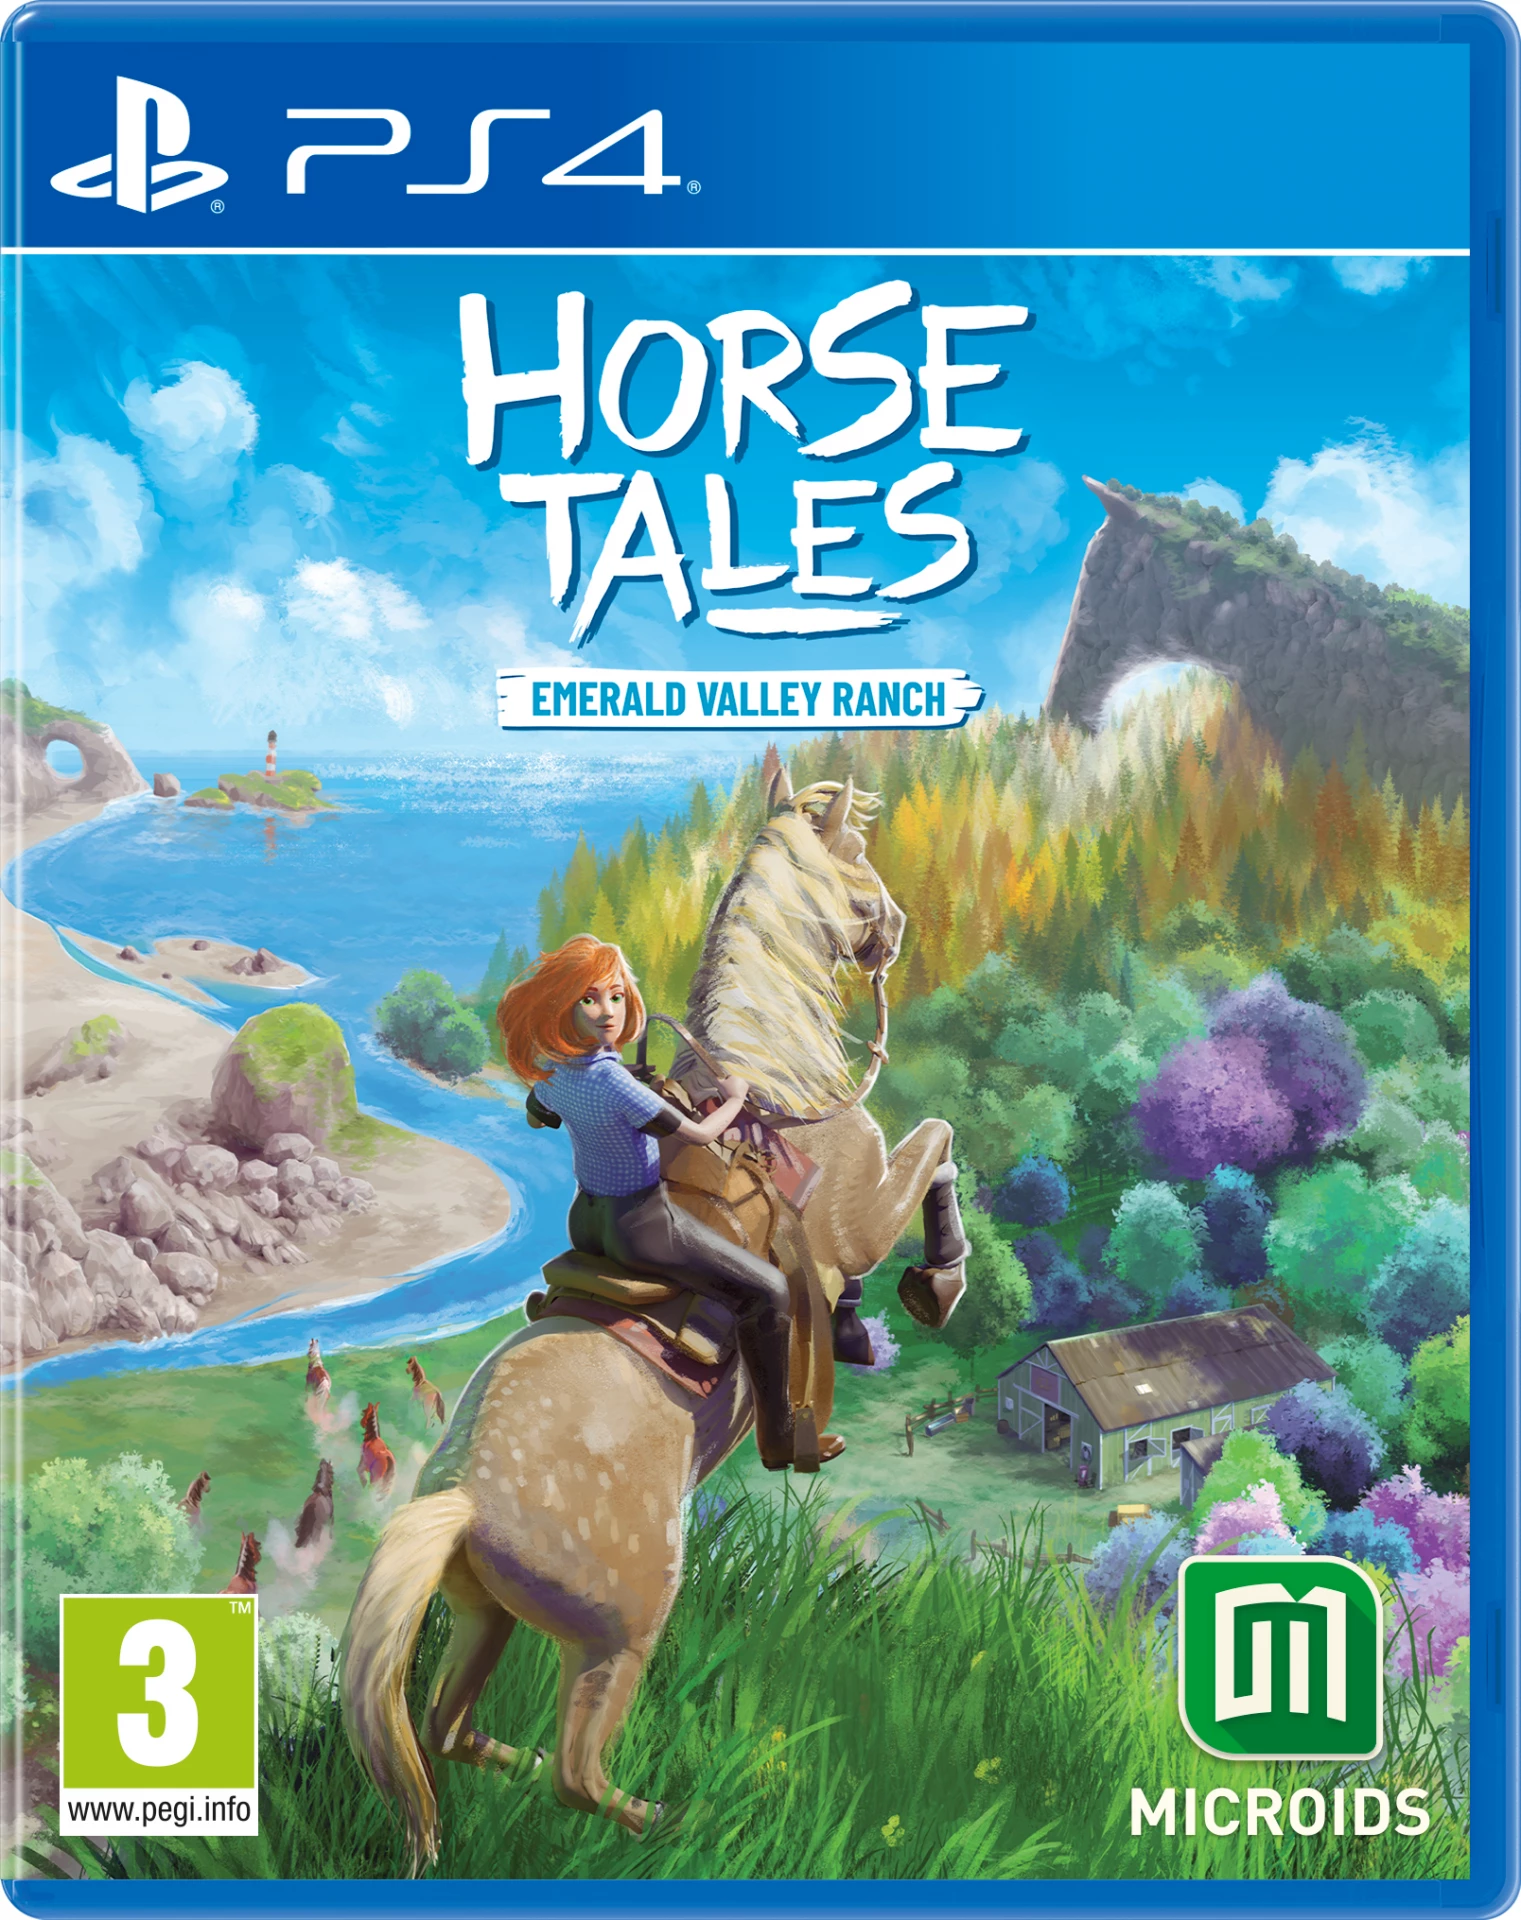 Horse Tales: Emerald Valley Ranch (PS4), Microids